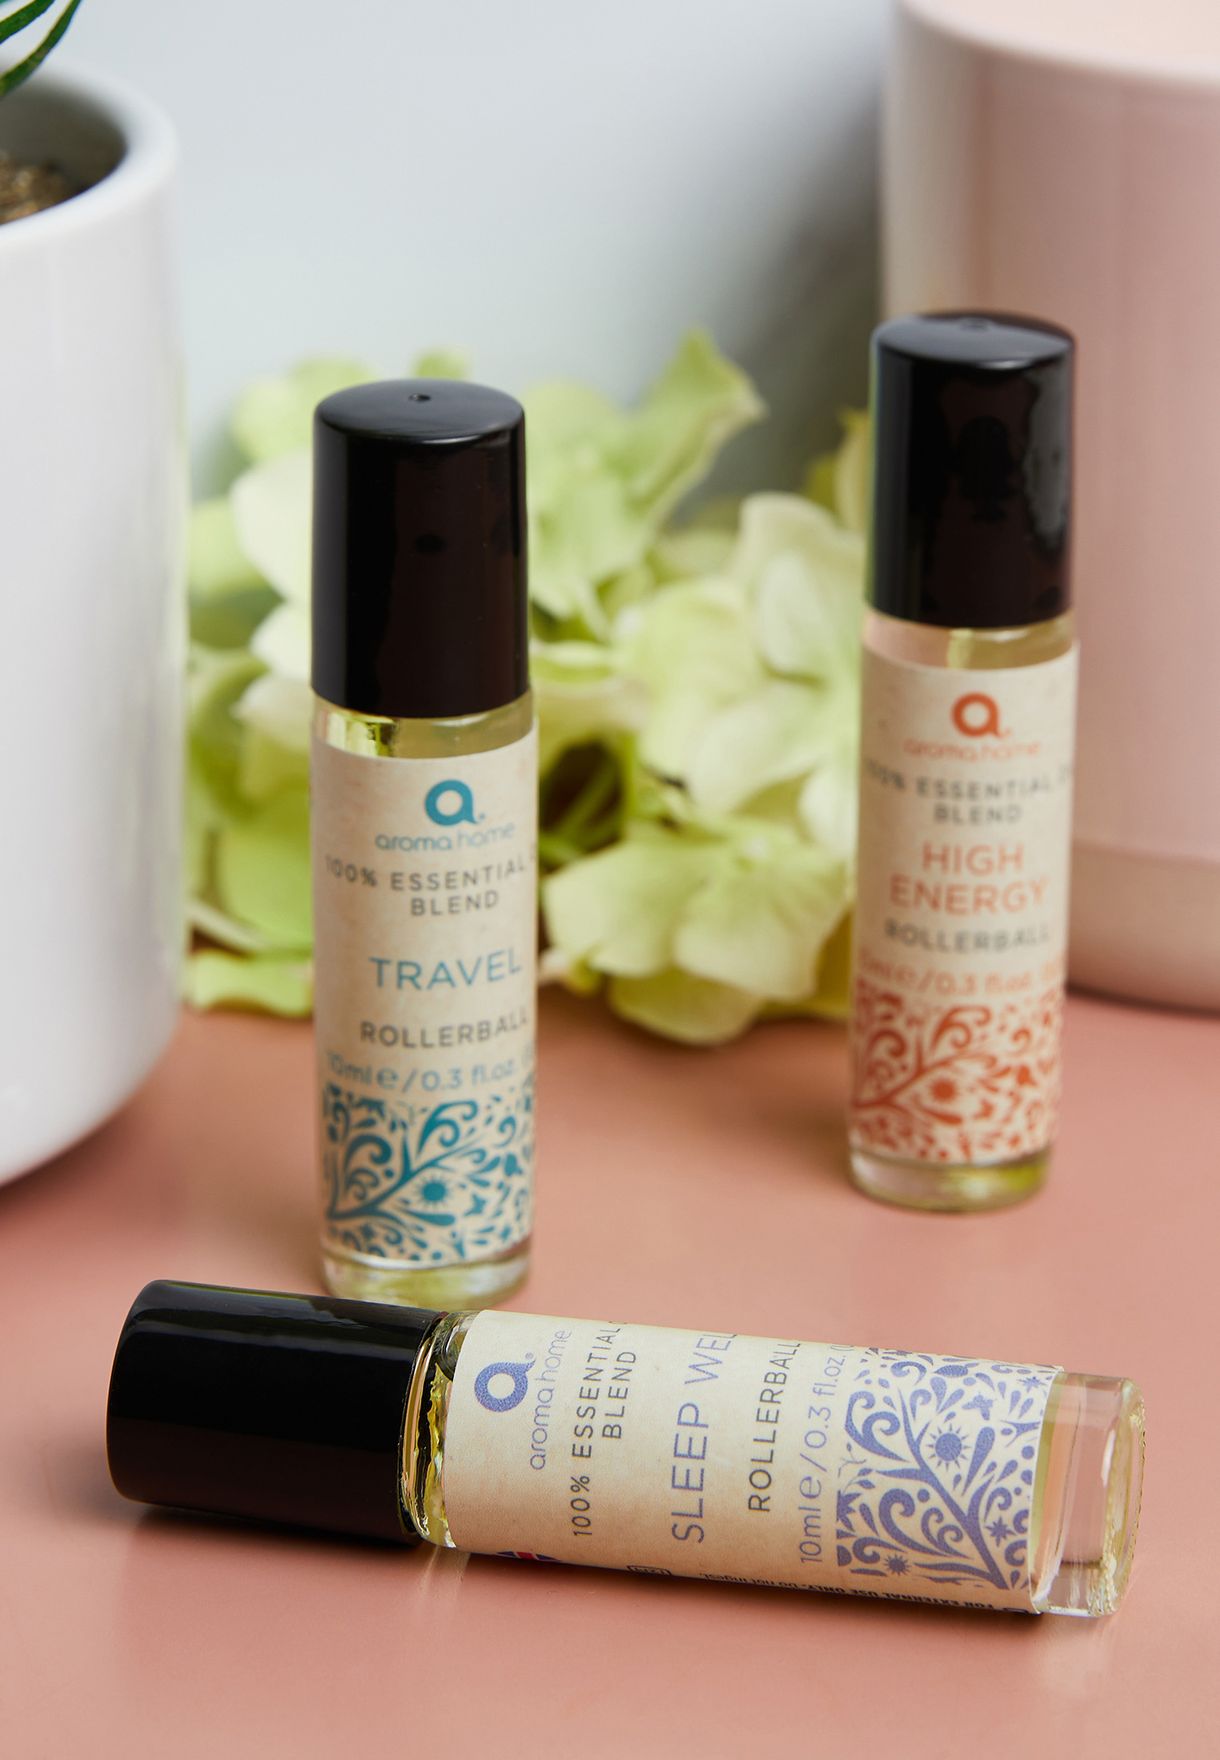 Set Of 3 On The Go Essential Oil Rollerballs